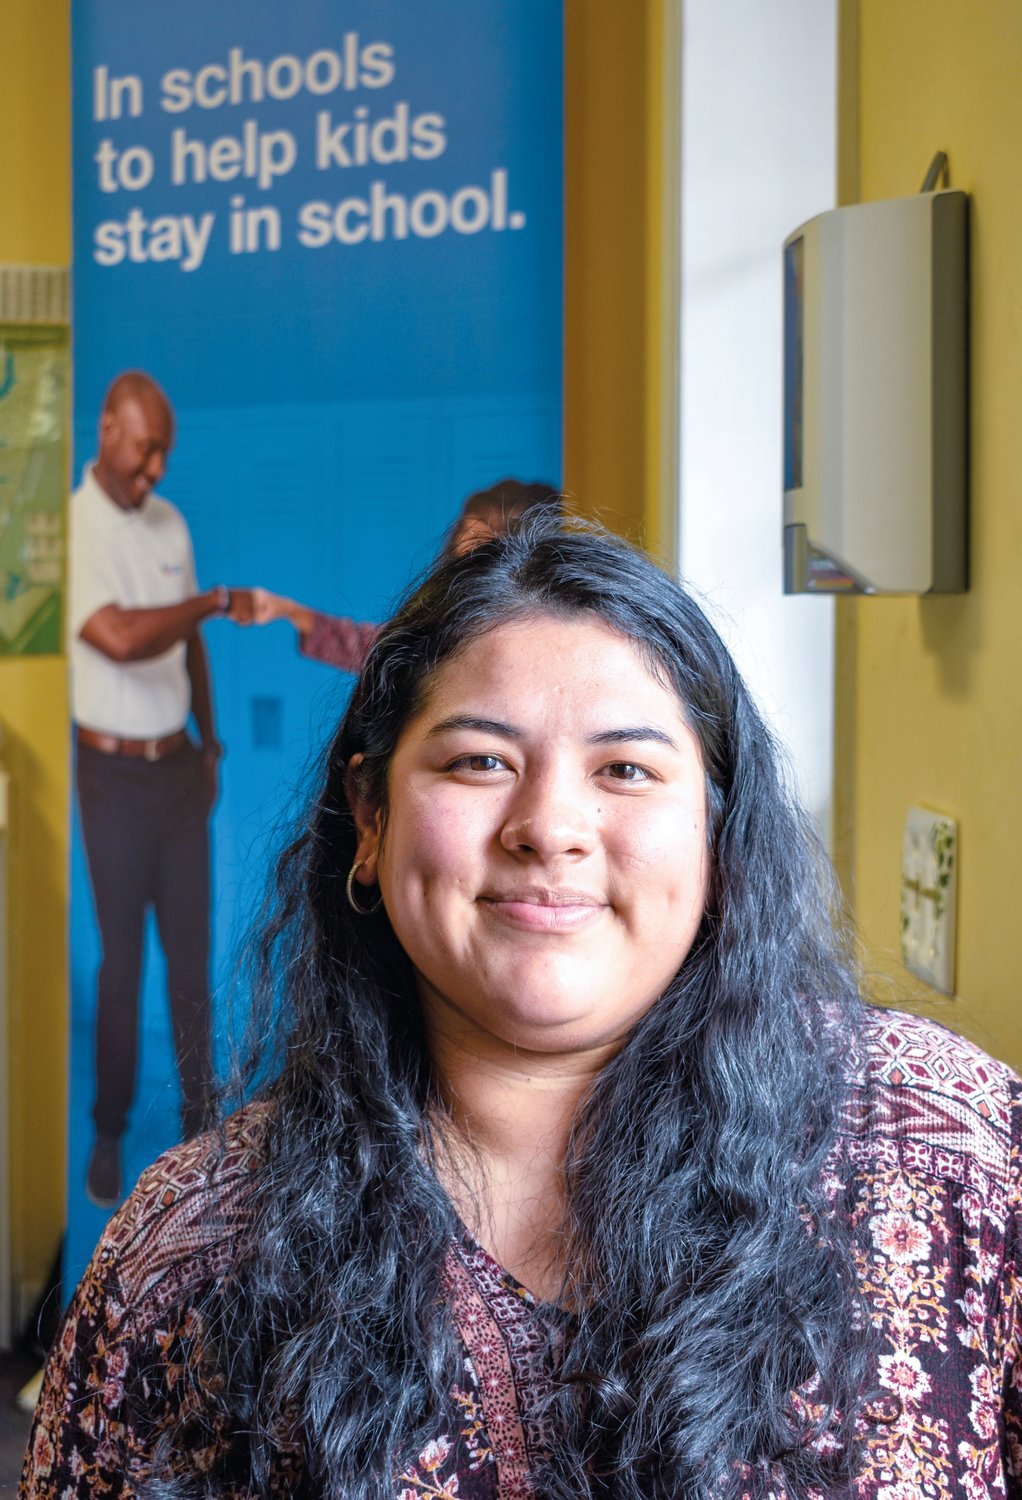 Ilsen Lopez, 25, is CIS-Chatham's first bilingual student support specialist at Chatham Middle School. She started at the organization in February.